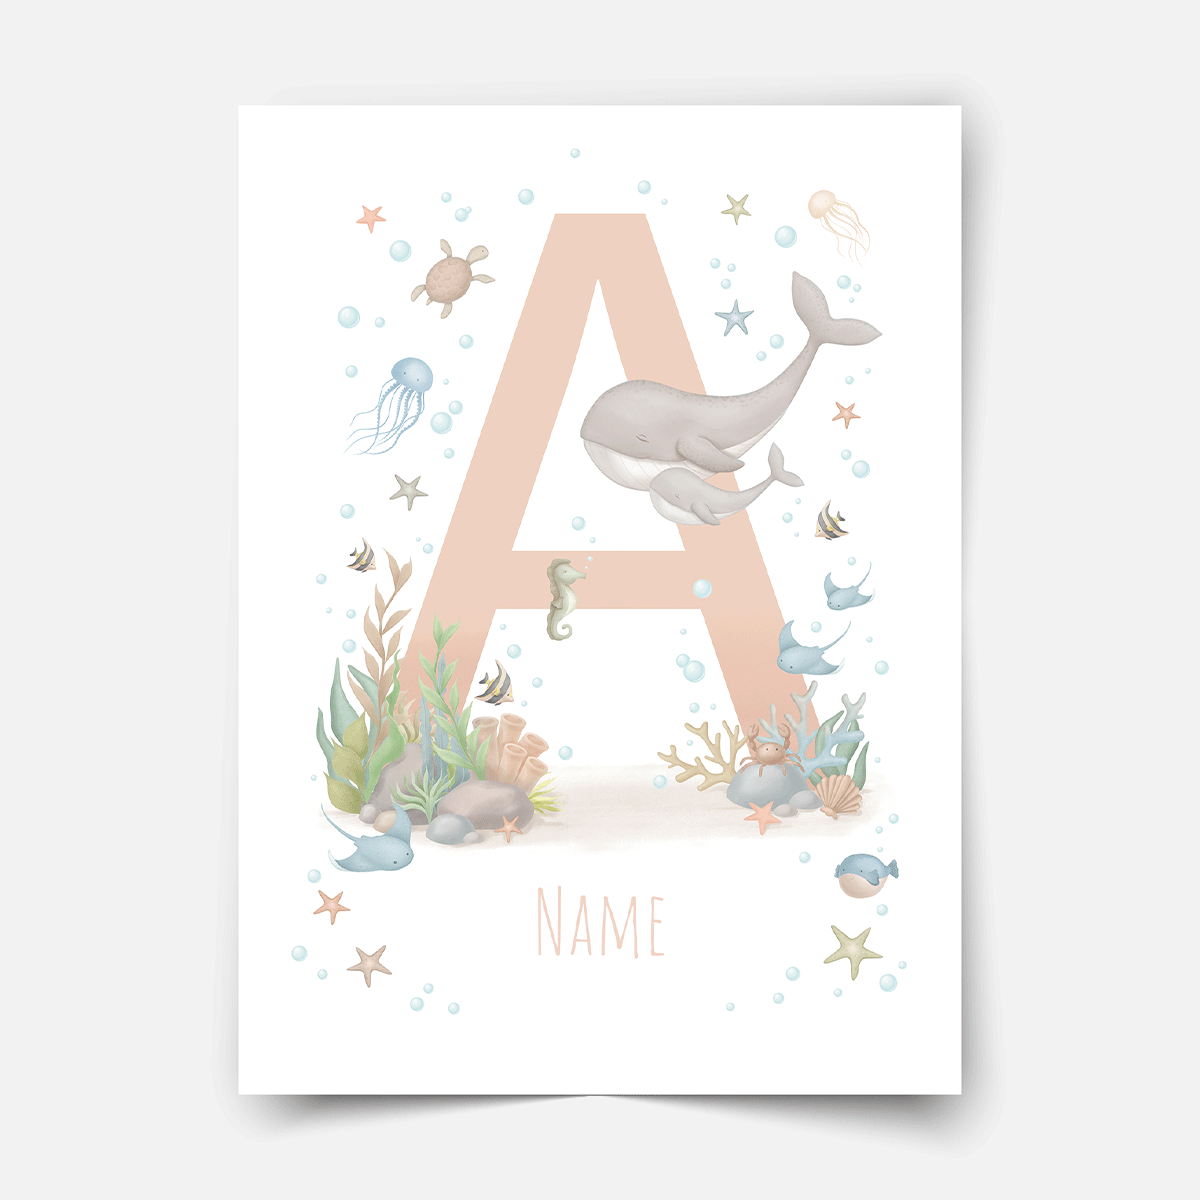 Personalised print - ABC Letters - Magical ocean (soft pink)